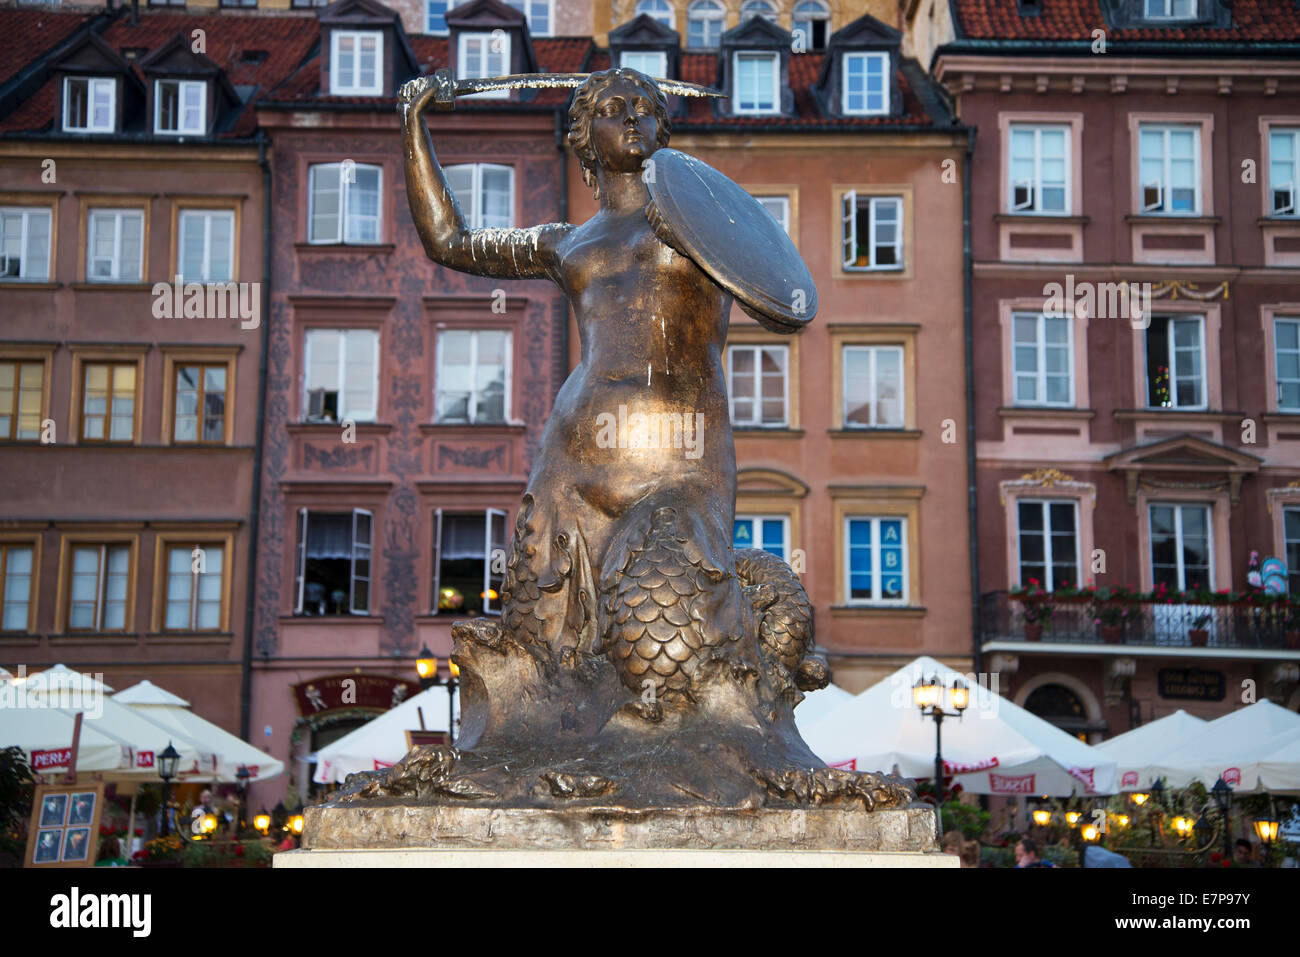 Poland June 2014: 'The Warsaw Mermaid' statue in Warsaw's Old Town Market Square Stock Photo